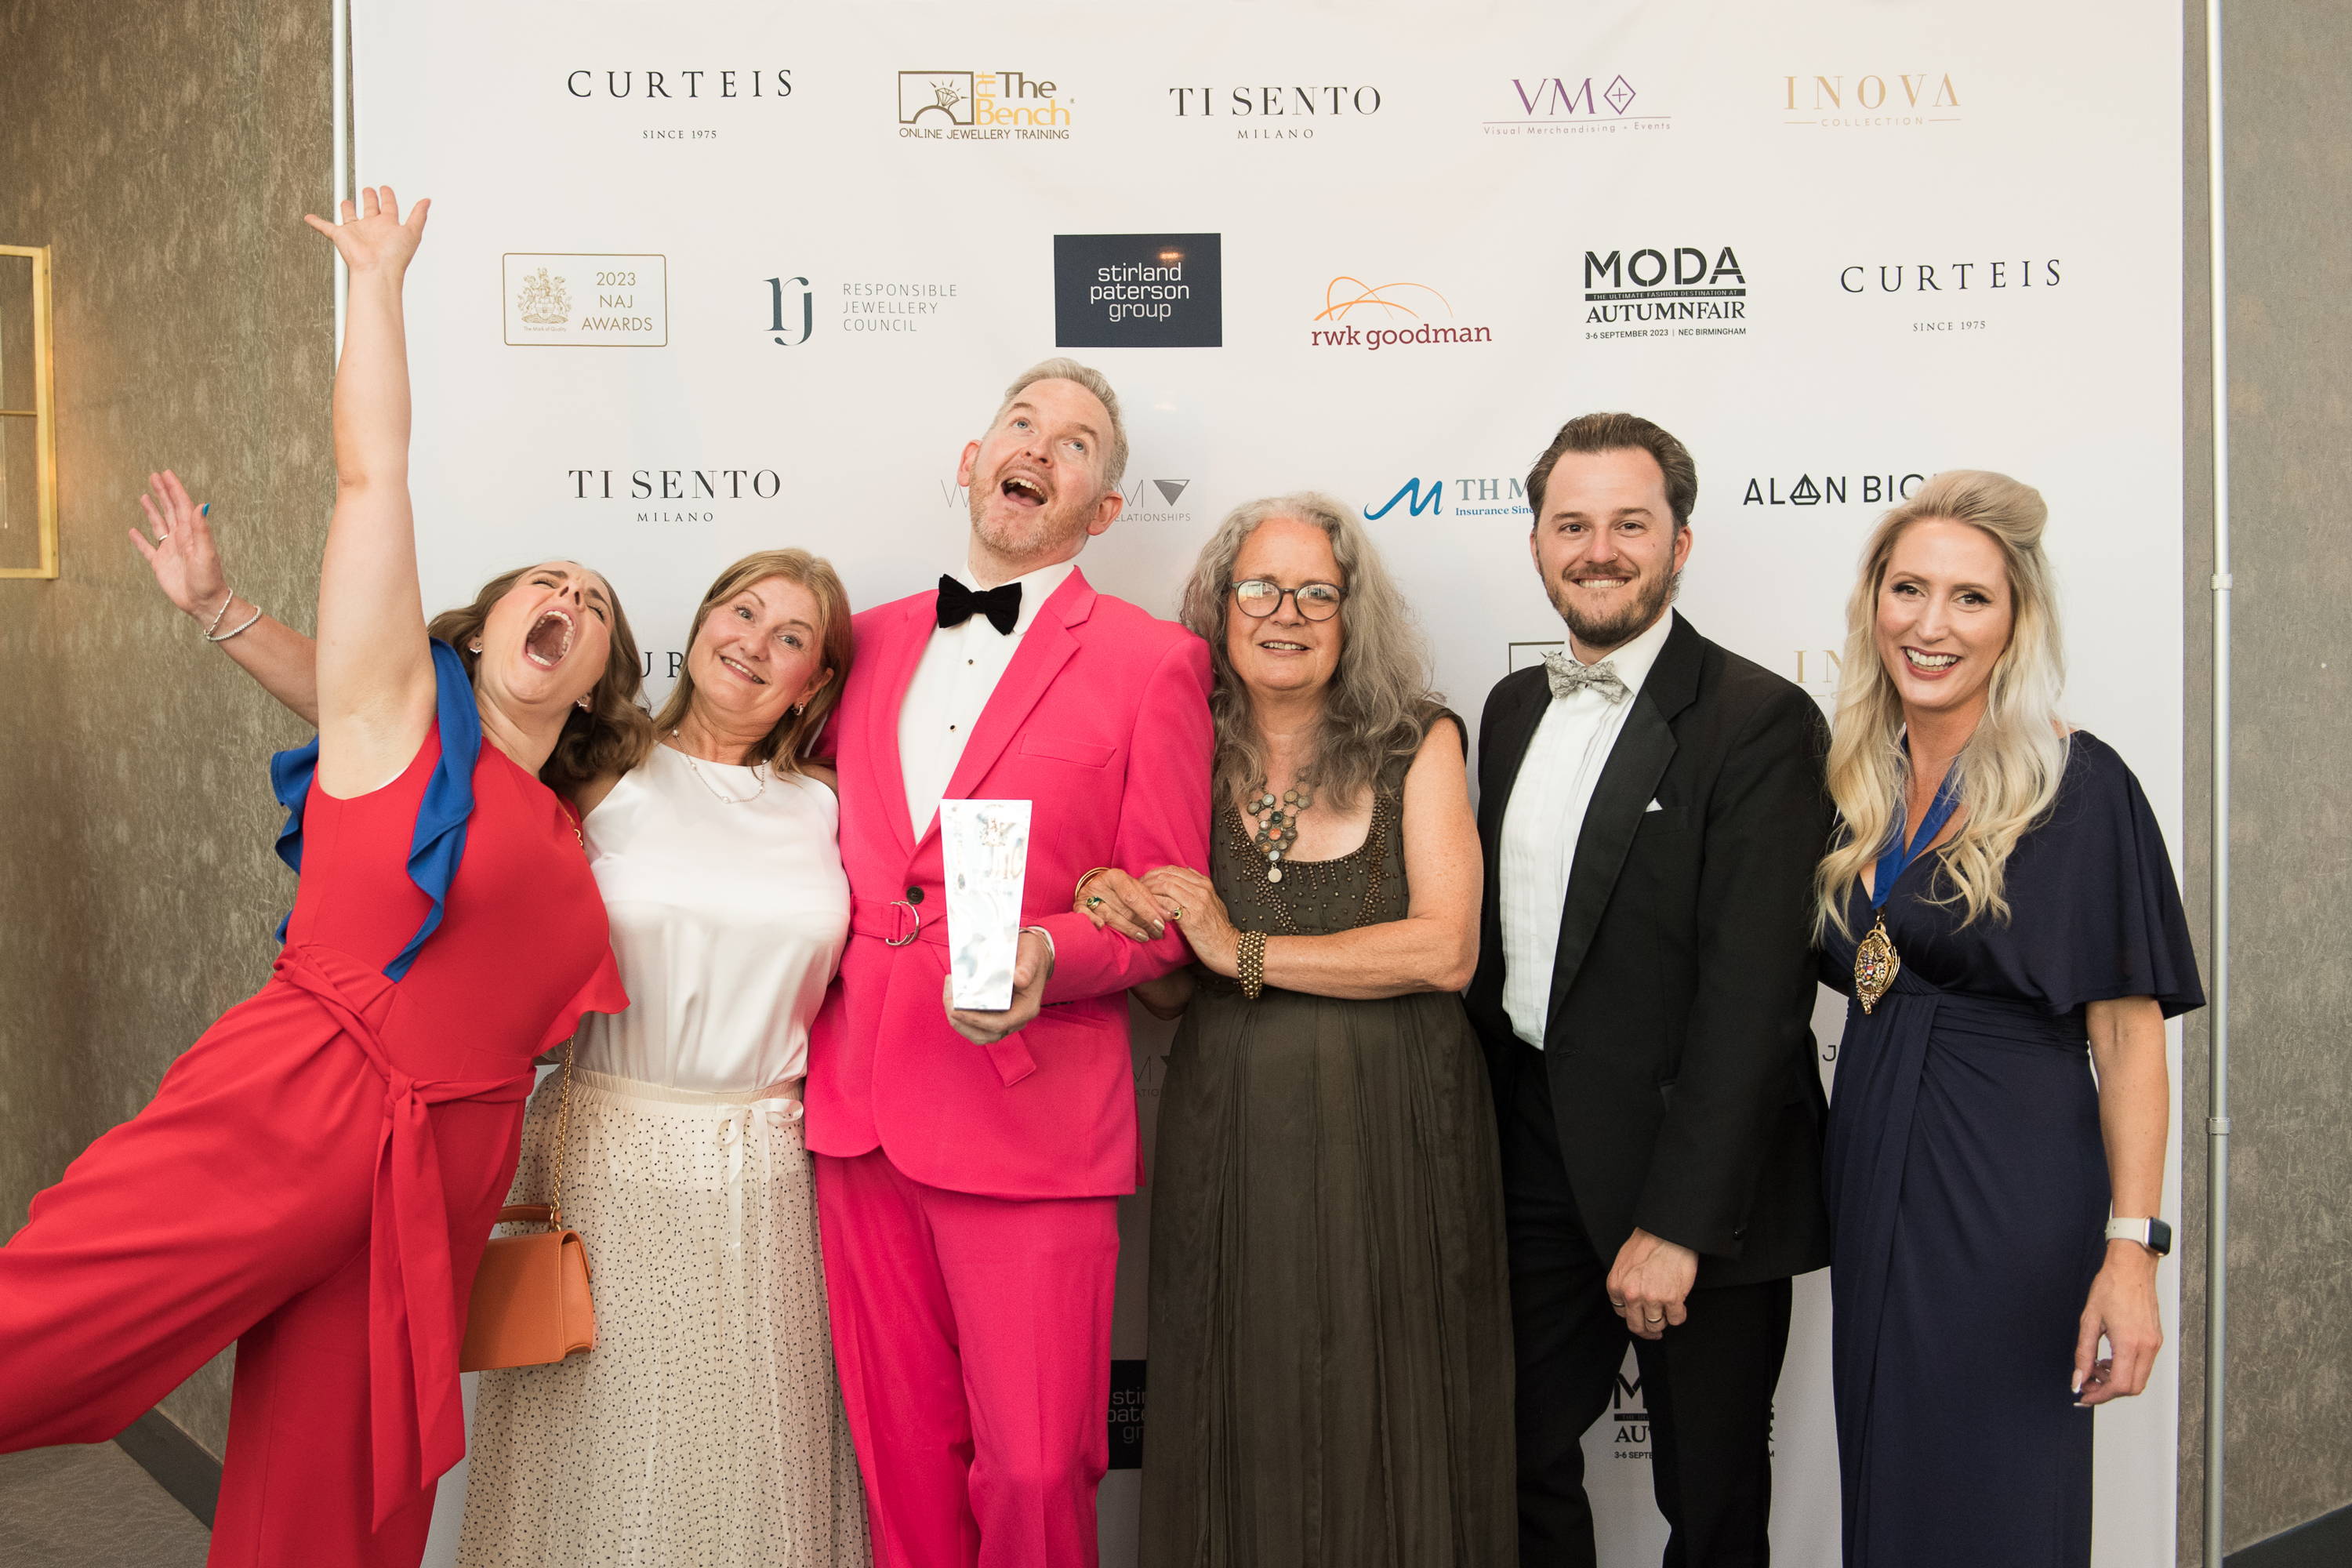 The Flinn & Steel team are presented with a trophy on stage at the UK Jewellery Awards in London's Hilton Metropole.